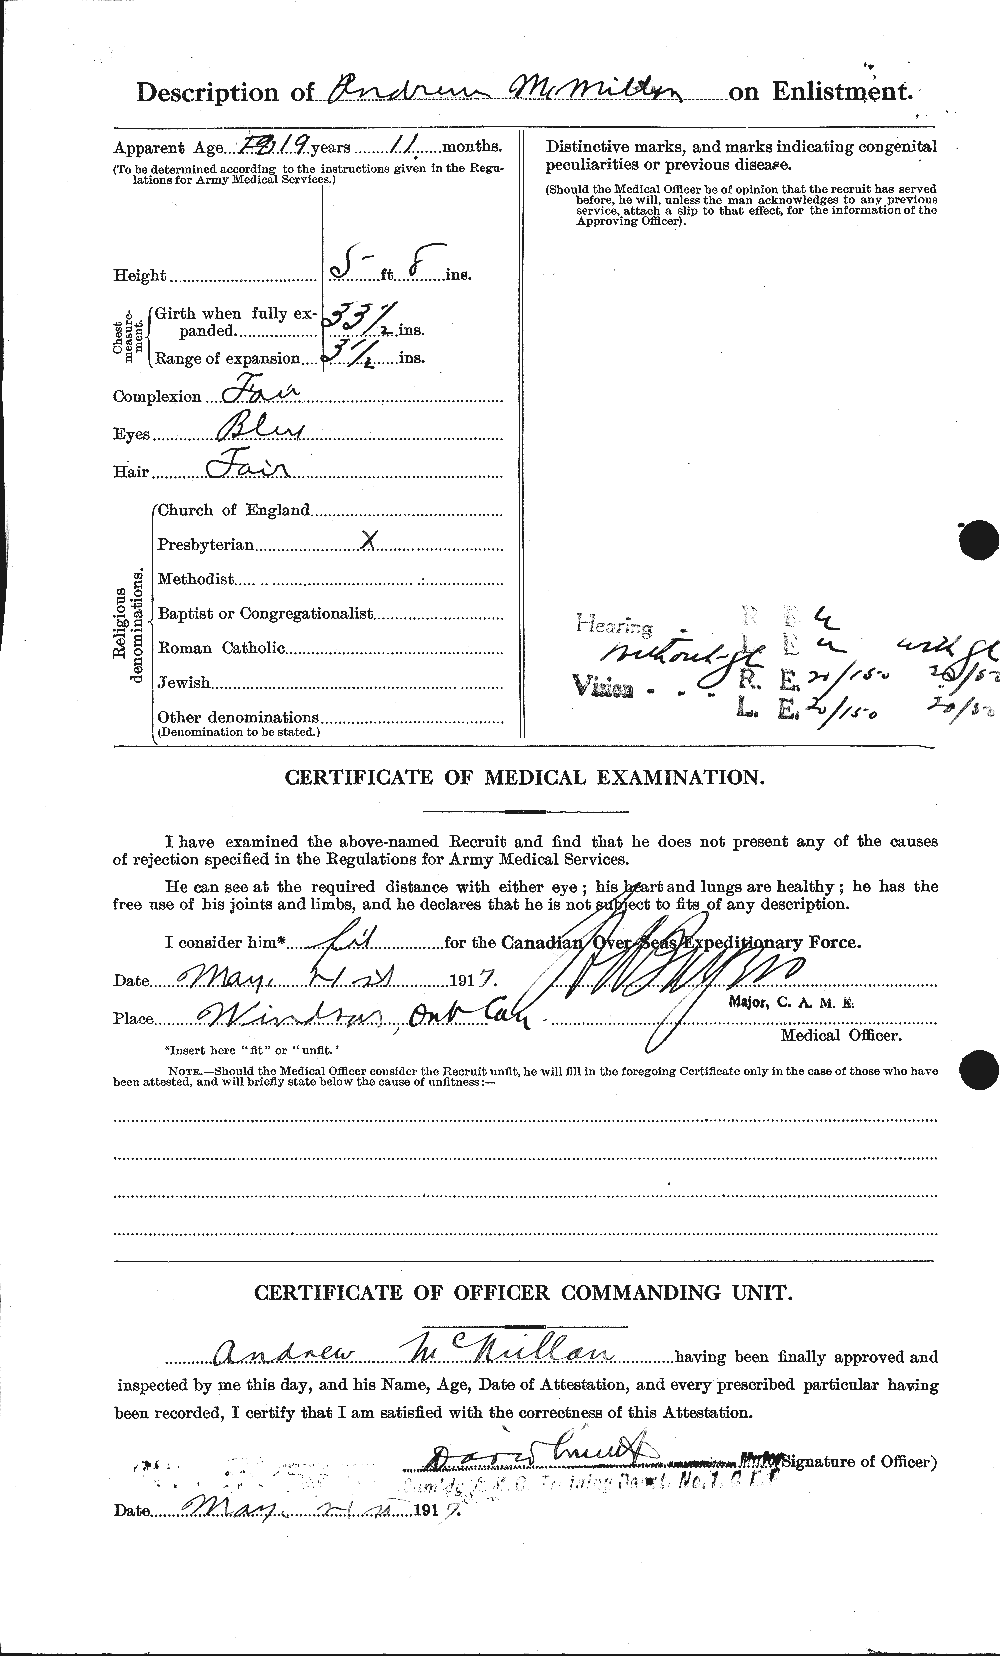 Personnel Records of the First World War - CEF 537498b